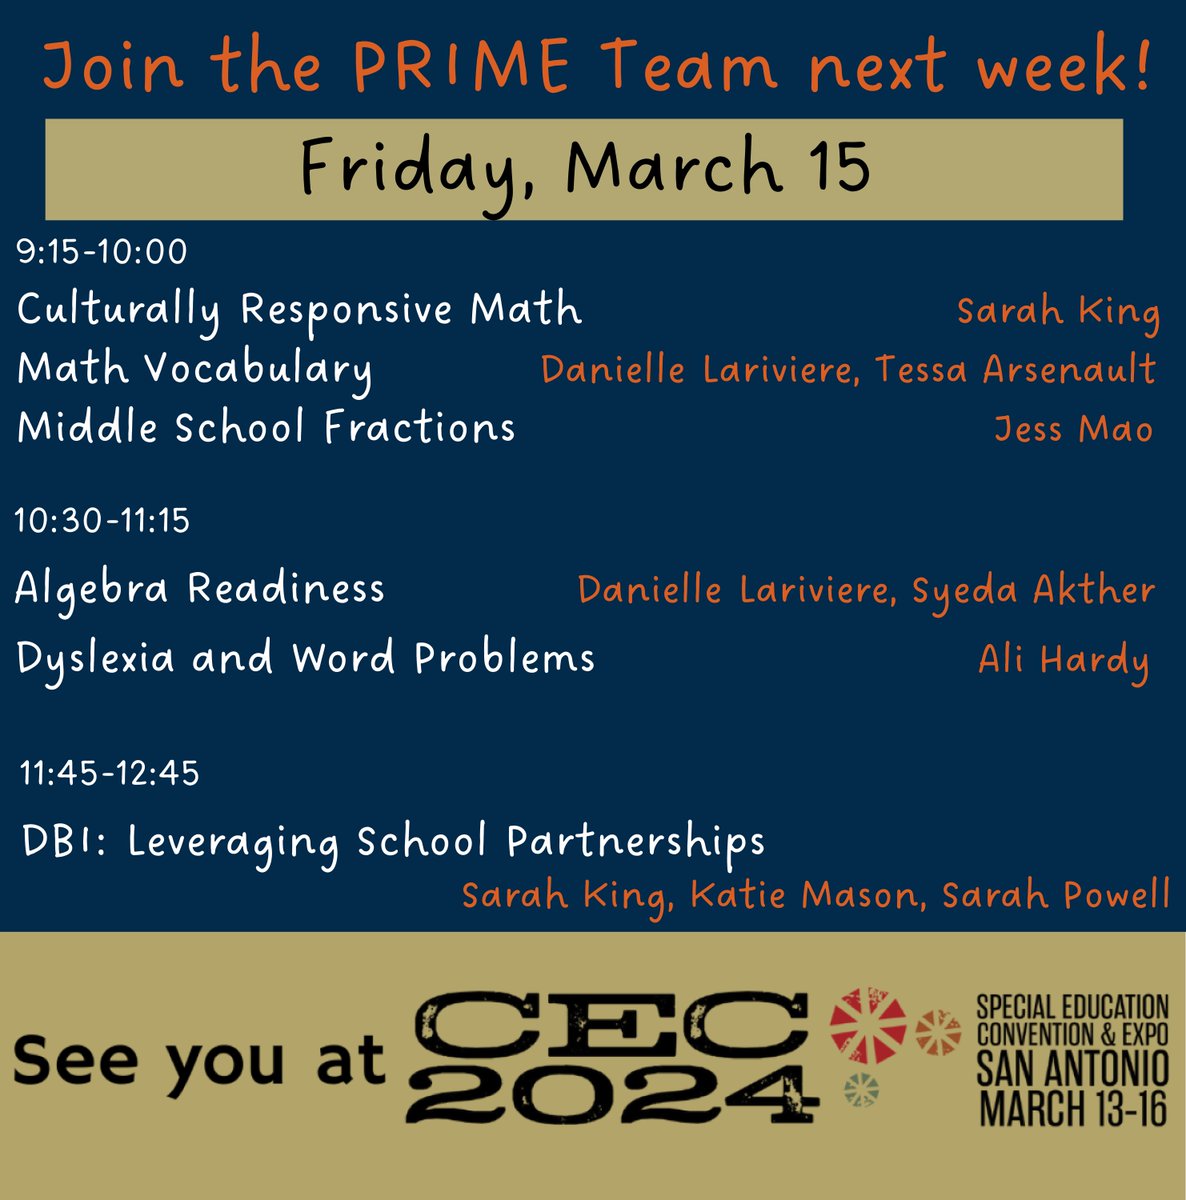 And next Friday at #CEC2024 - the #PRIMETeam has lots of great math presentations. Come talk with us!